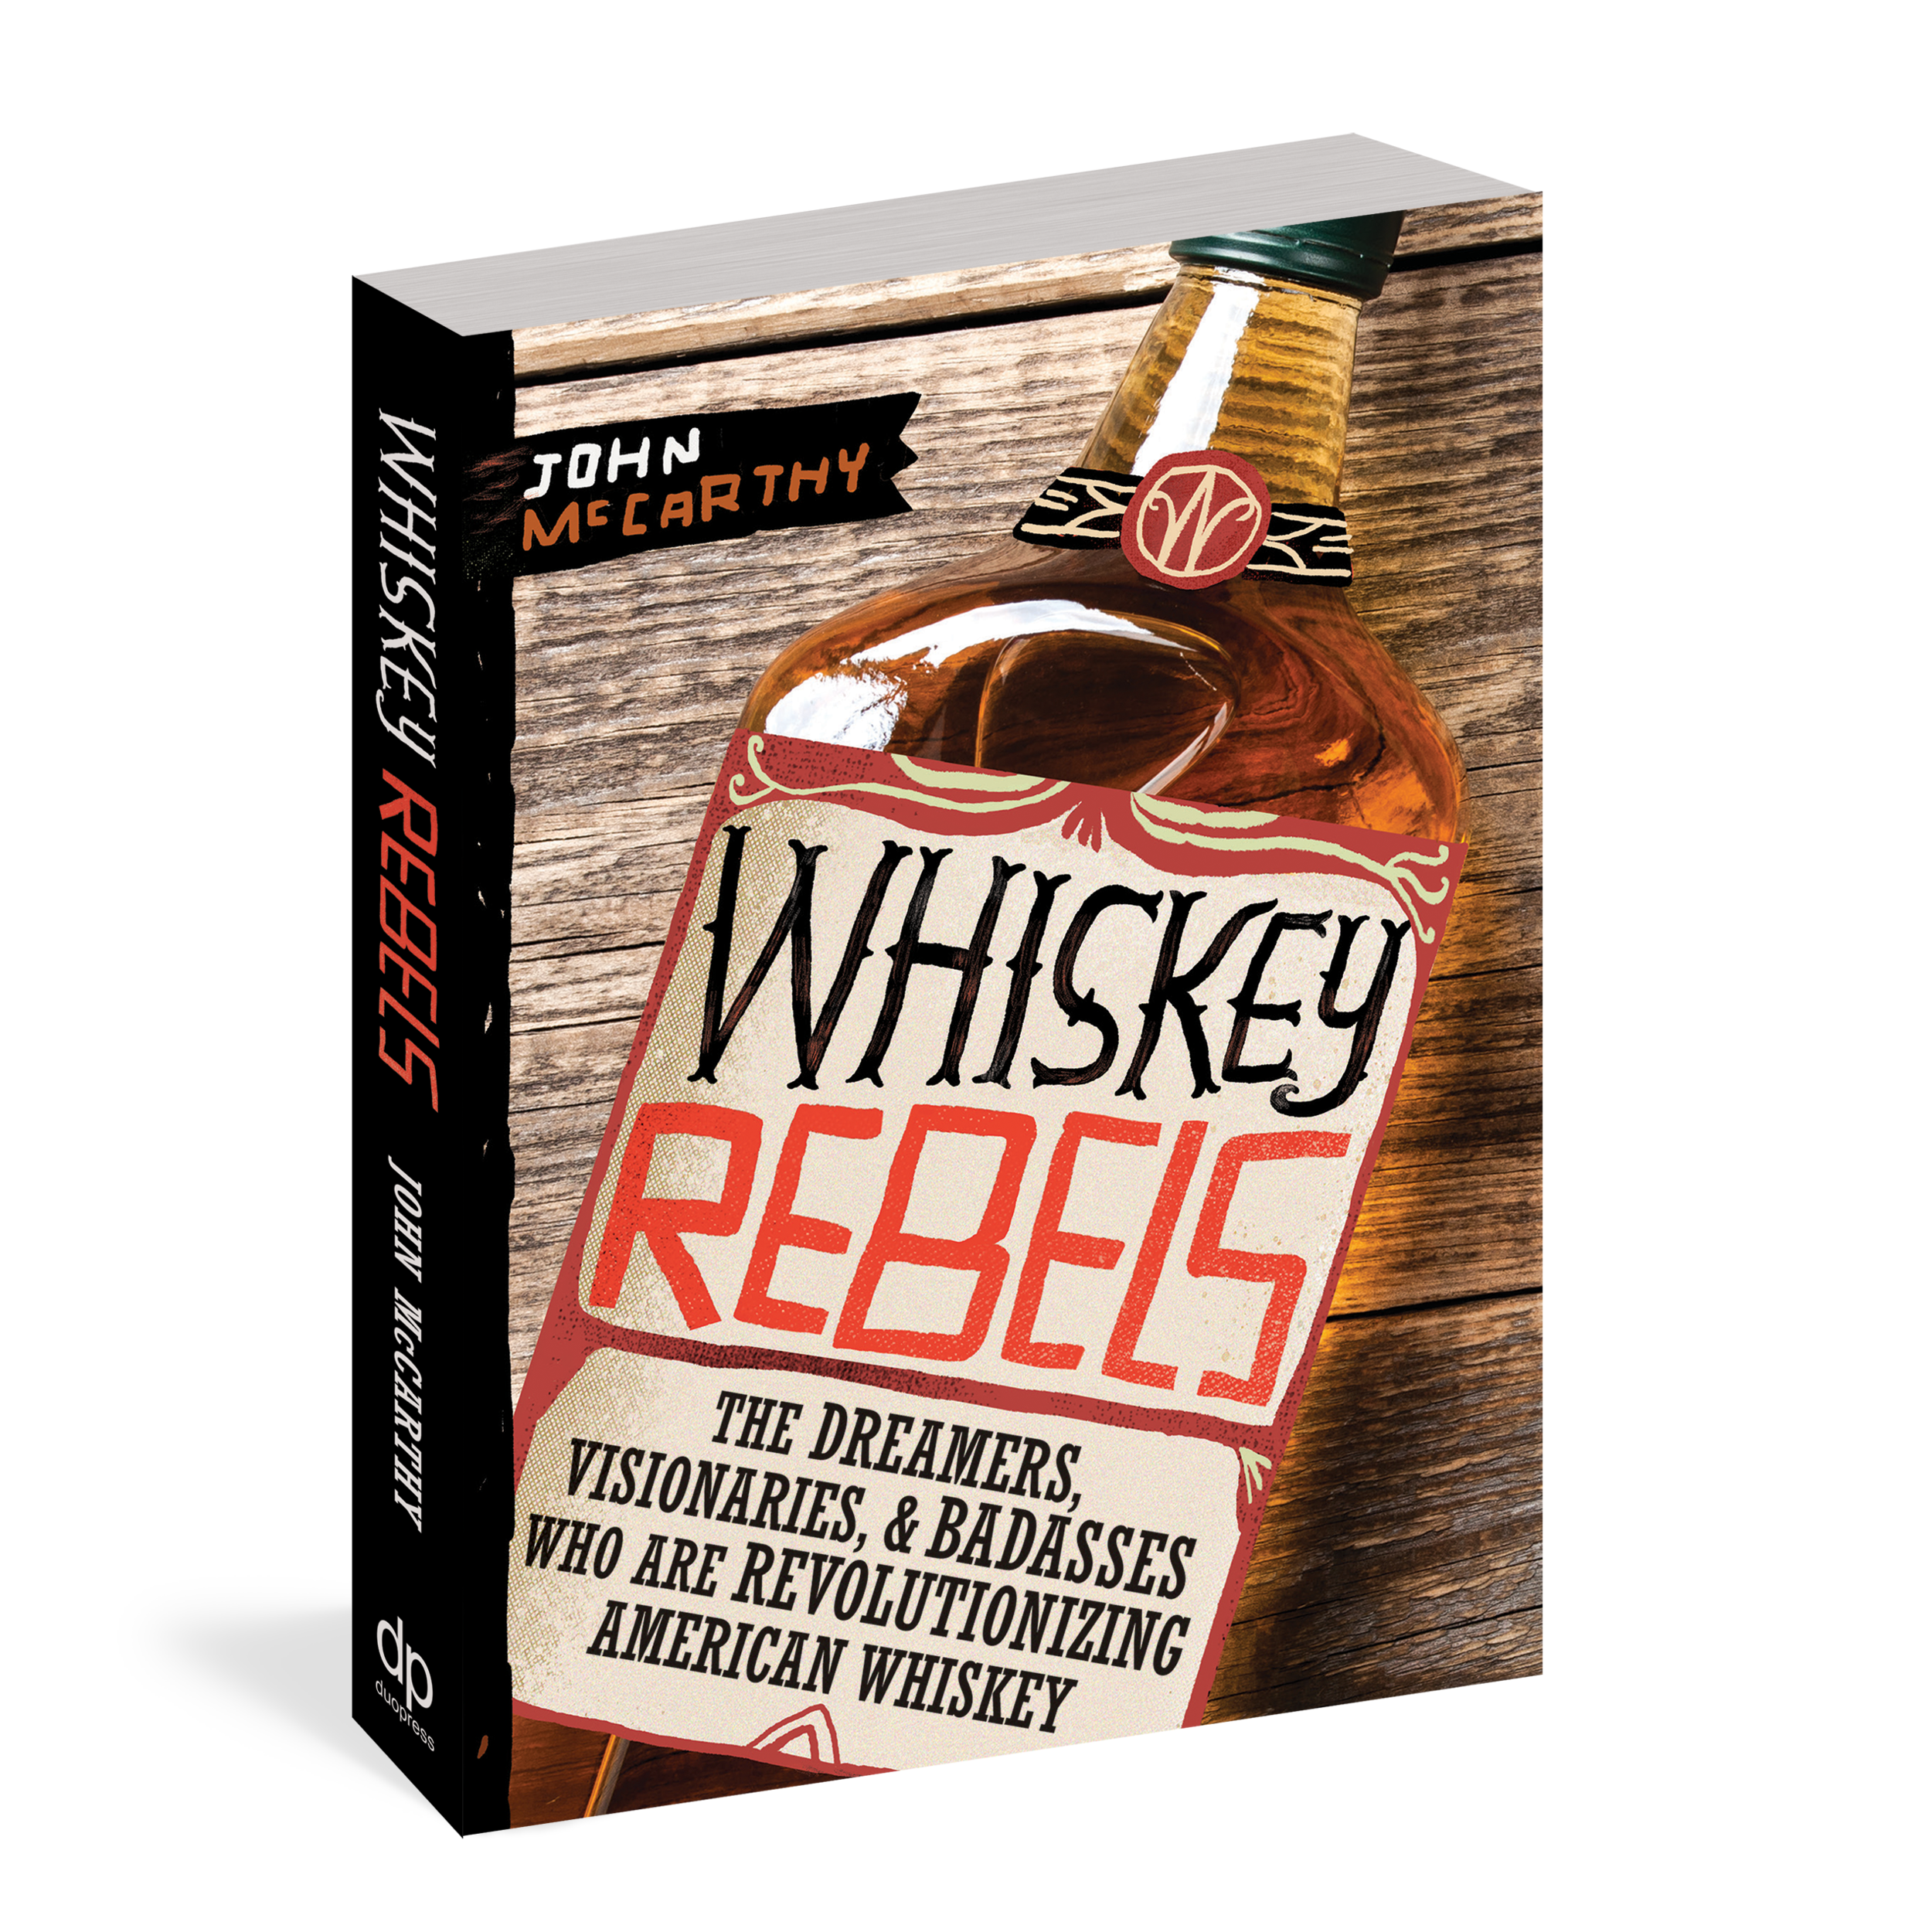 Whiskey Rebels: The Dreamers, Visionaries &amp; Badasses Who Are Revolutionizing American Whiskey (Copy) (Copy) (Copy) (Copy) (Copy) (Copy)